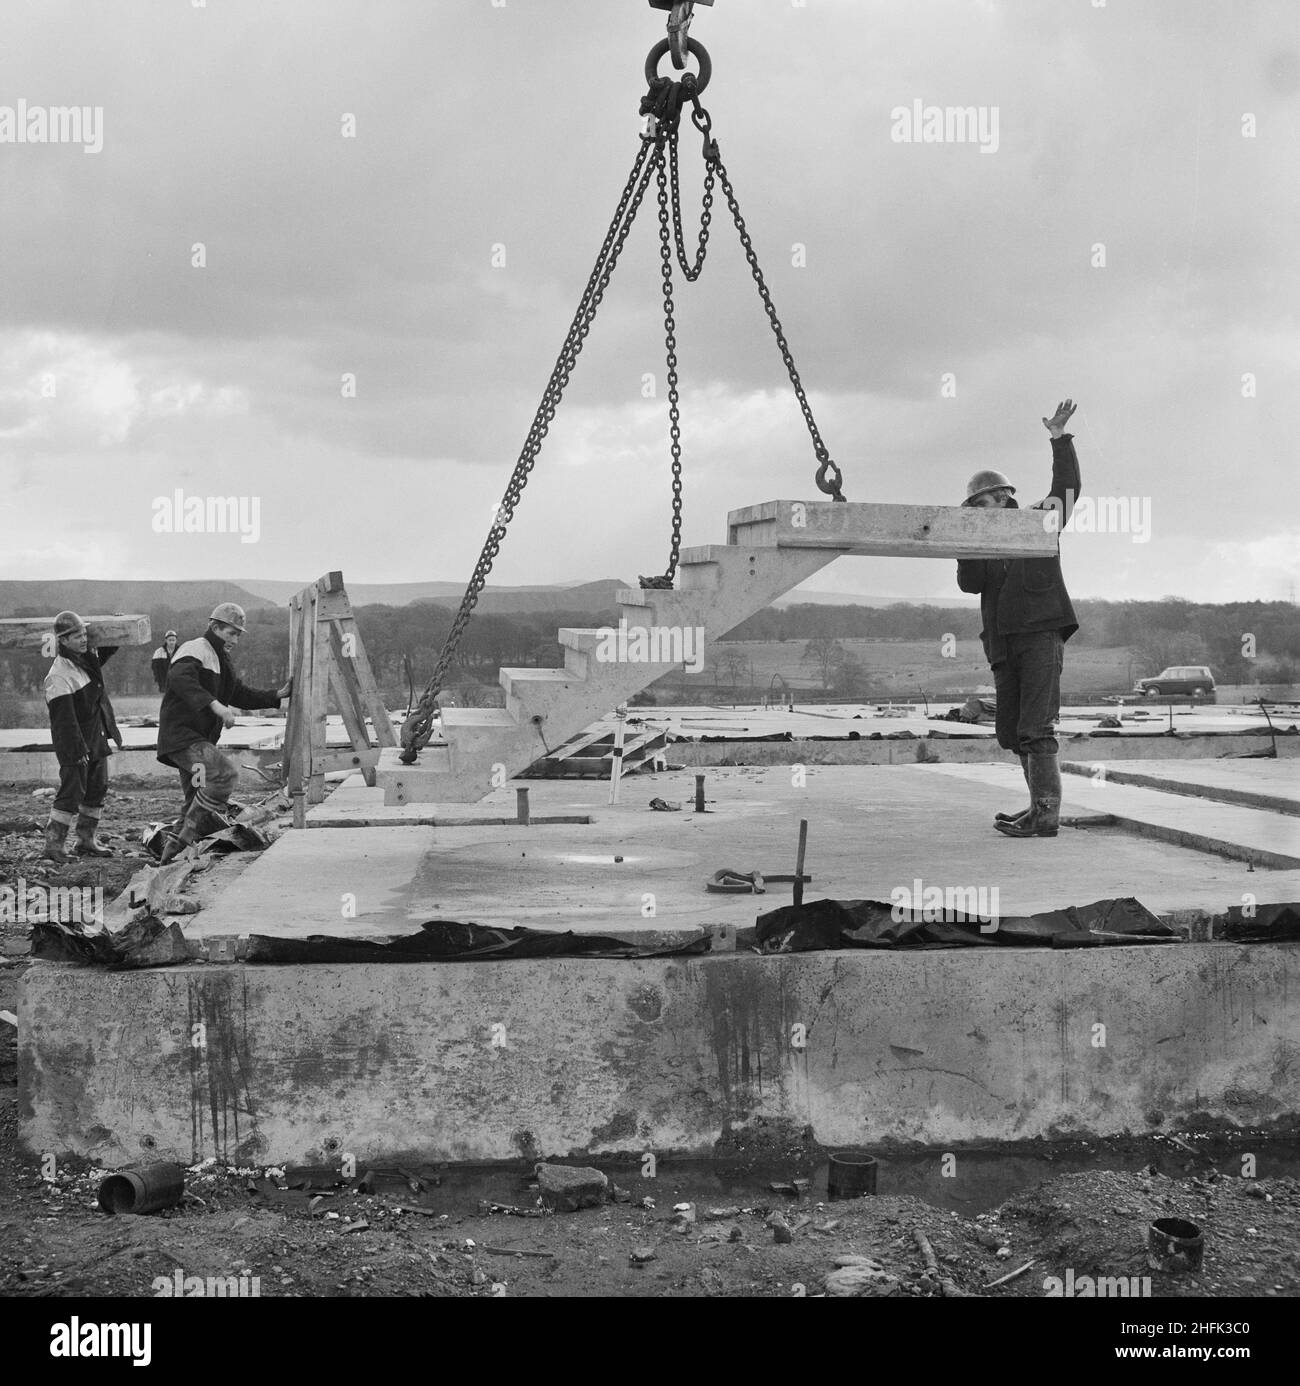 Craigshill, Livingston, West Lothian, Scotland, 01/10/1965. A team of Laing workers lowering a prefabricated concrete staircase into position at a Jespersen construction compound, probably at the Craigshill development in Livingston. In 1963, John Laing and Son Ltd bought the rights to the Danish industrialised building system known as Jespersen (sometimes referred to as Jesperson). The company built factories in Scotland, Hampshire and Lancashire producing Jespersen prefabricated parts and precast concrete panels, allowing the building of housing to be rationalised, saving time and money. The Stock Photo